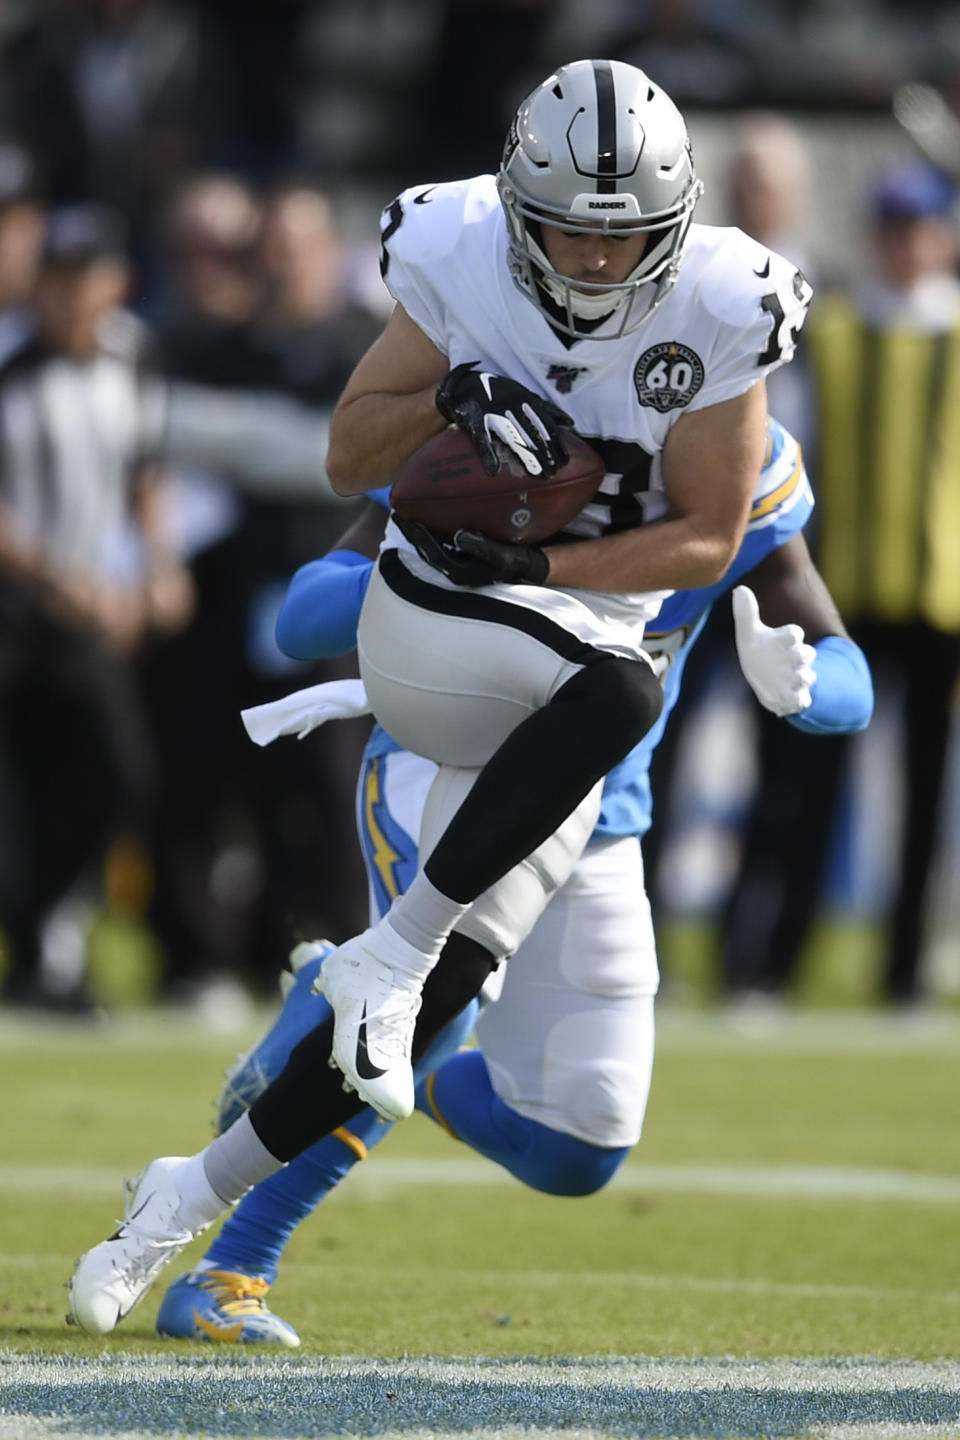 Oakland Raiders wide receiver Hunter Renfrow catches a touchdown pass in front of Los Angeles Chargers defensive back Desmond King during the first half of an NFL football game Sunday, Dec. 22, 2019, in Carson, Calif. (AP Photo/Kelvin Kuo)